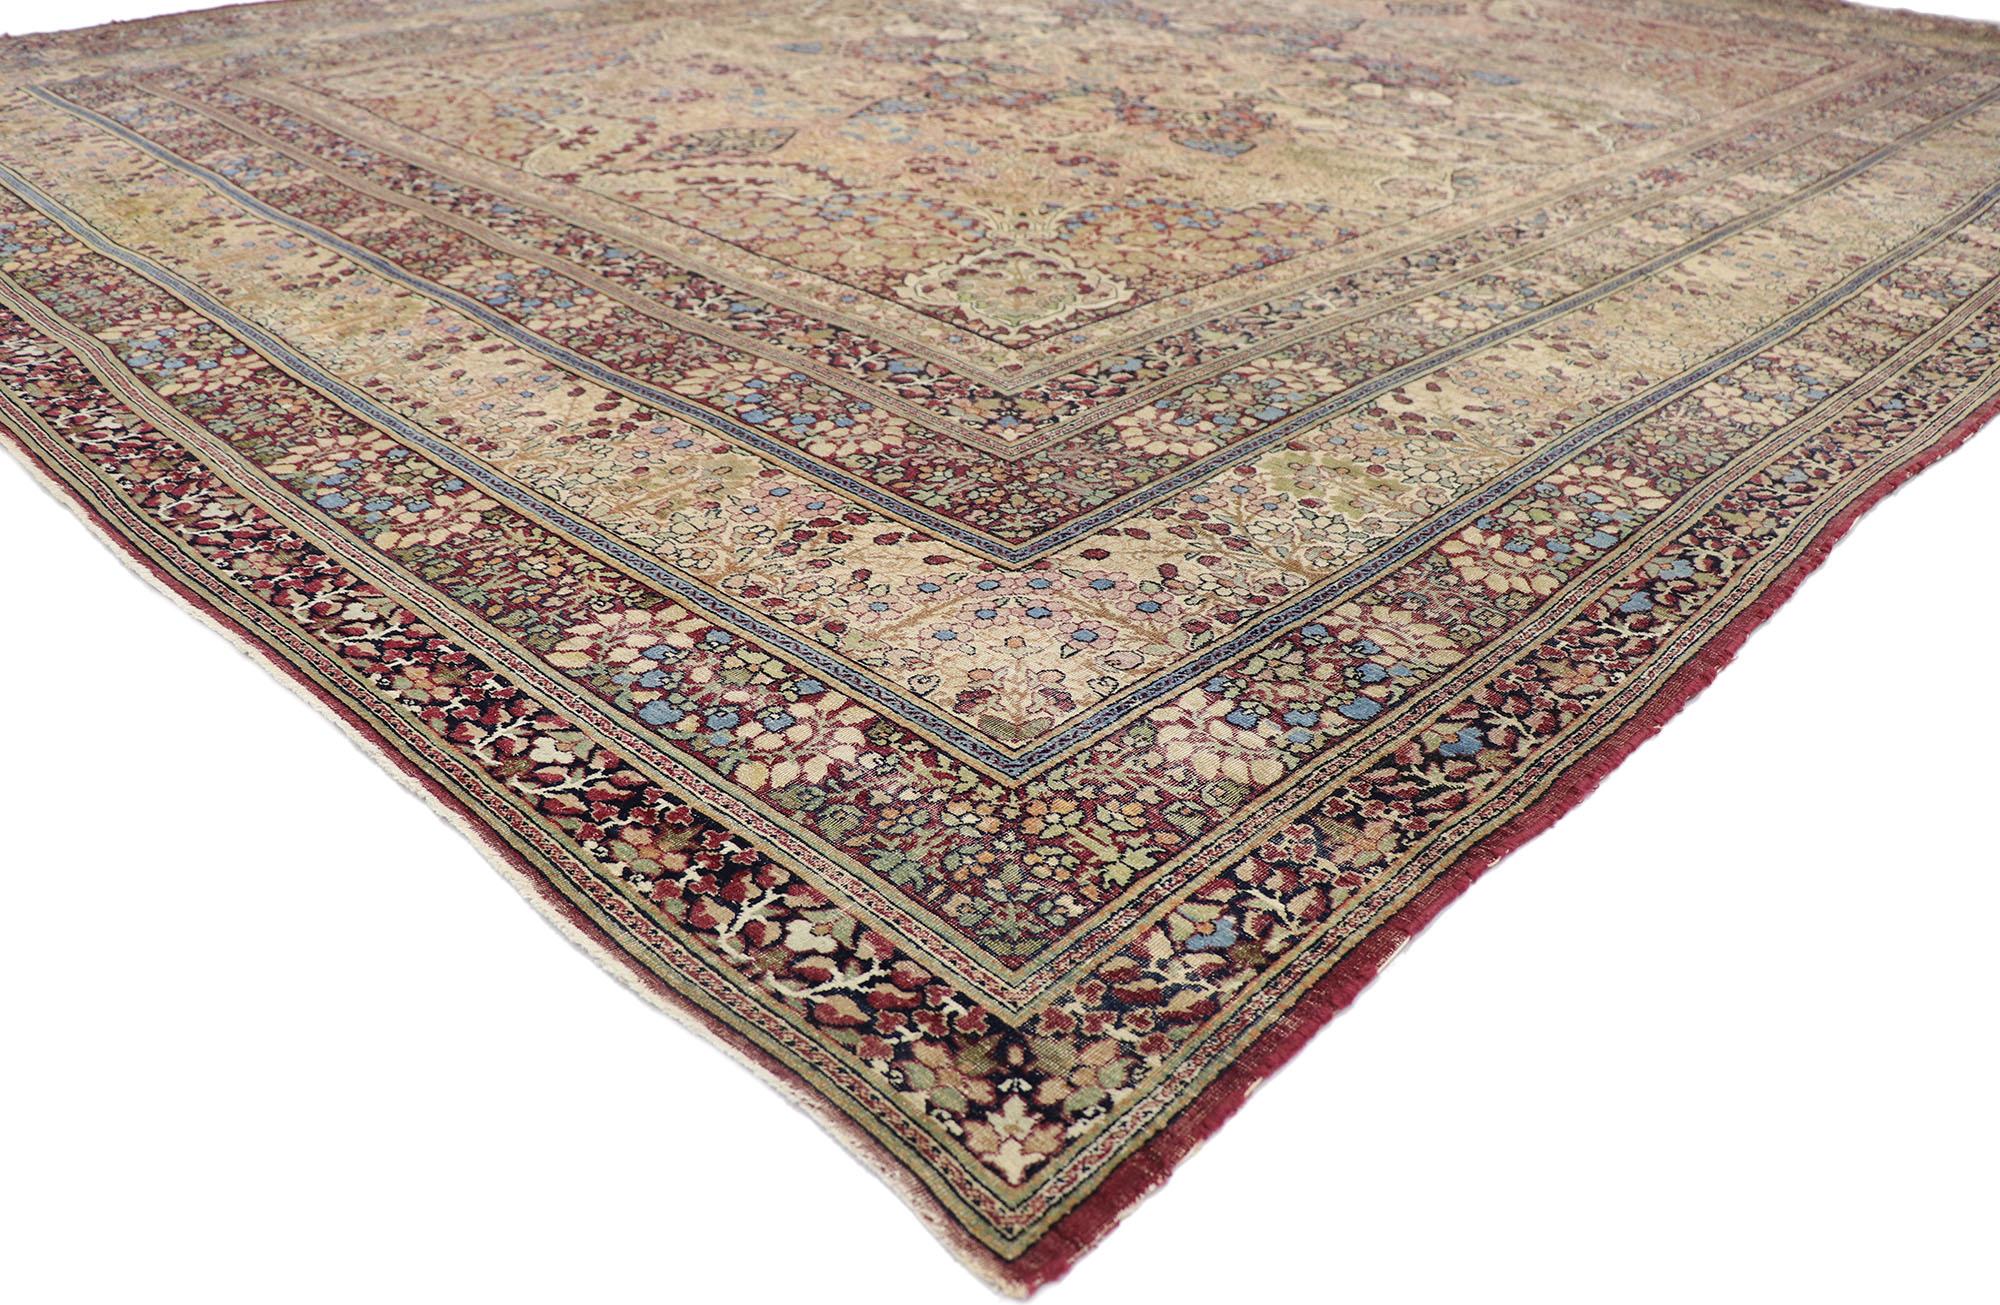 78080 distressed antique Persian Lavar Kermanshah rug 10'03 x 13'00. With its perfectly worn-in charm and rustic sensibility, this hand-knotted wool distressed antique Persian Lavar Kermanshah rug will take on a curated lived-in look that feels